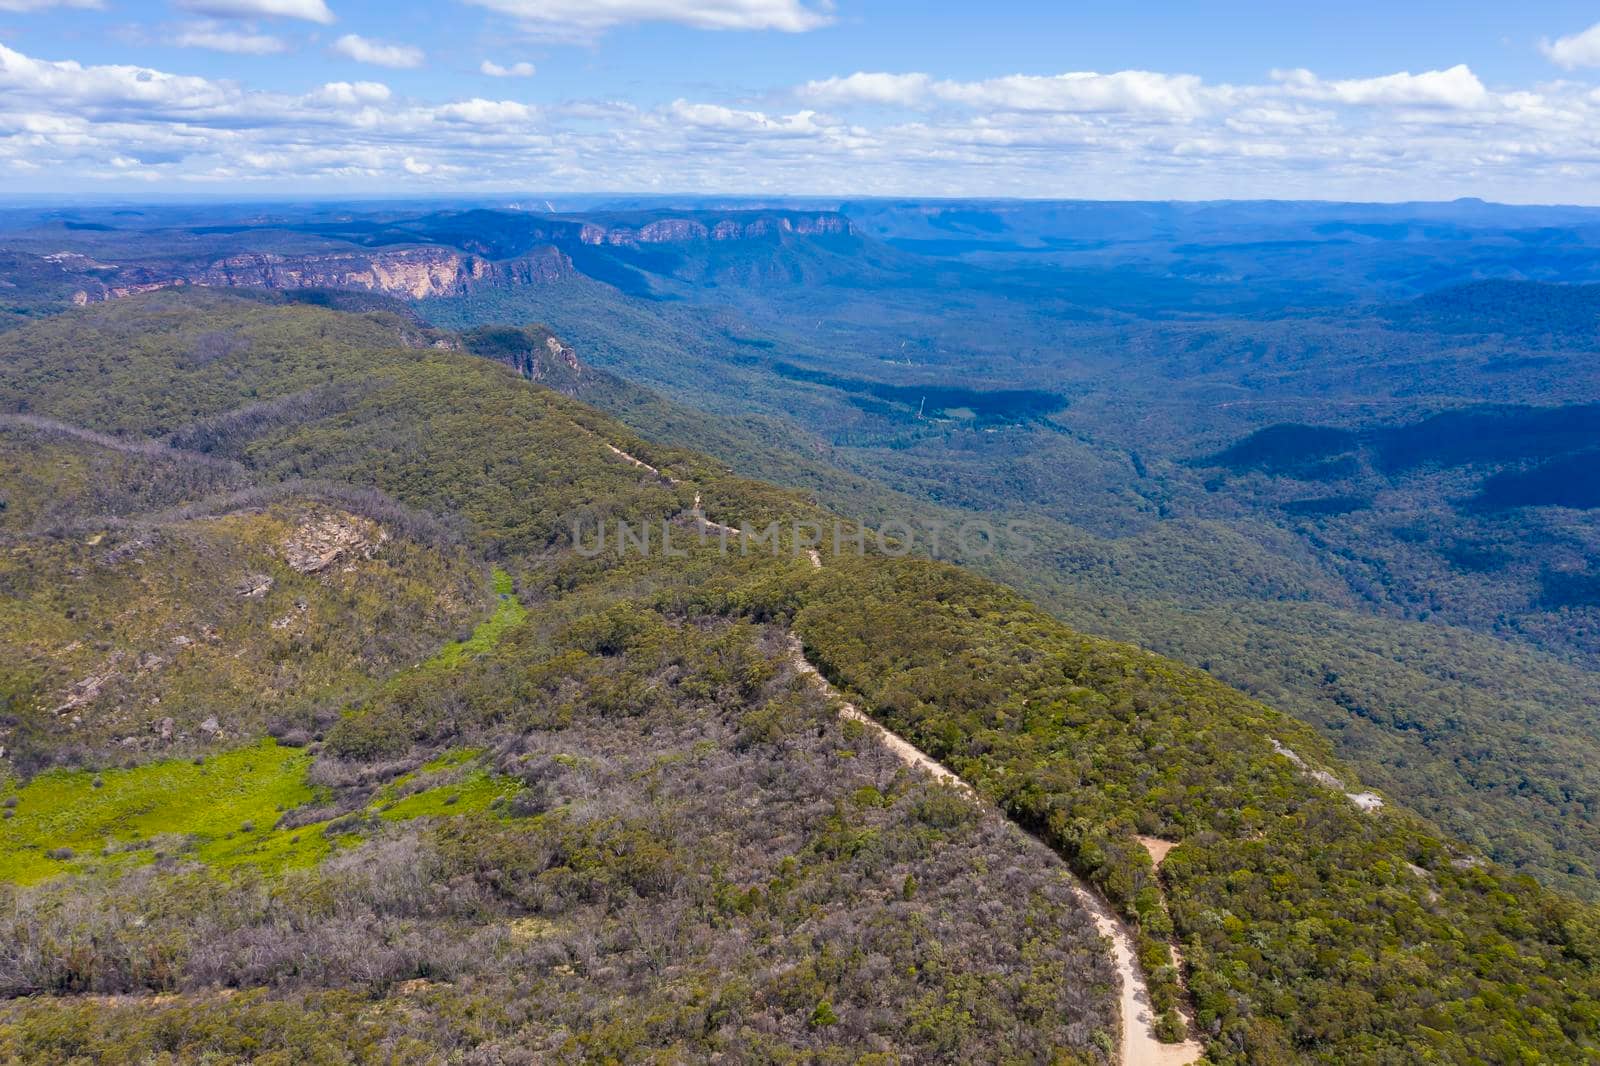 Aerial view of the Jamison Valley in The Blue Mountains in regional Australia by WittkePhotos